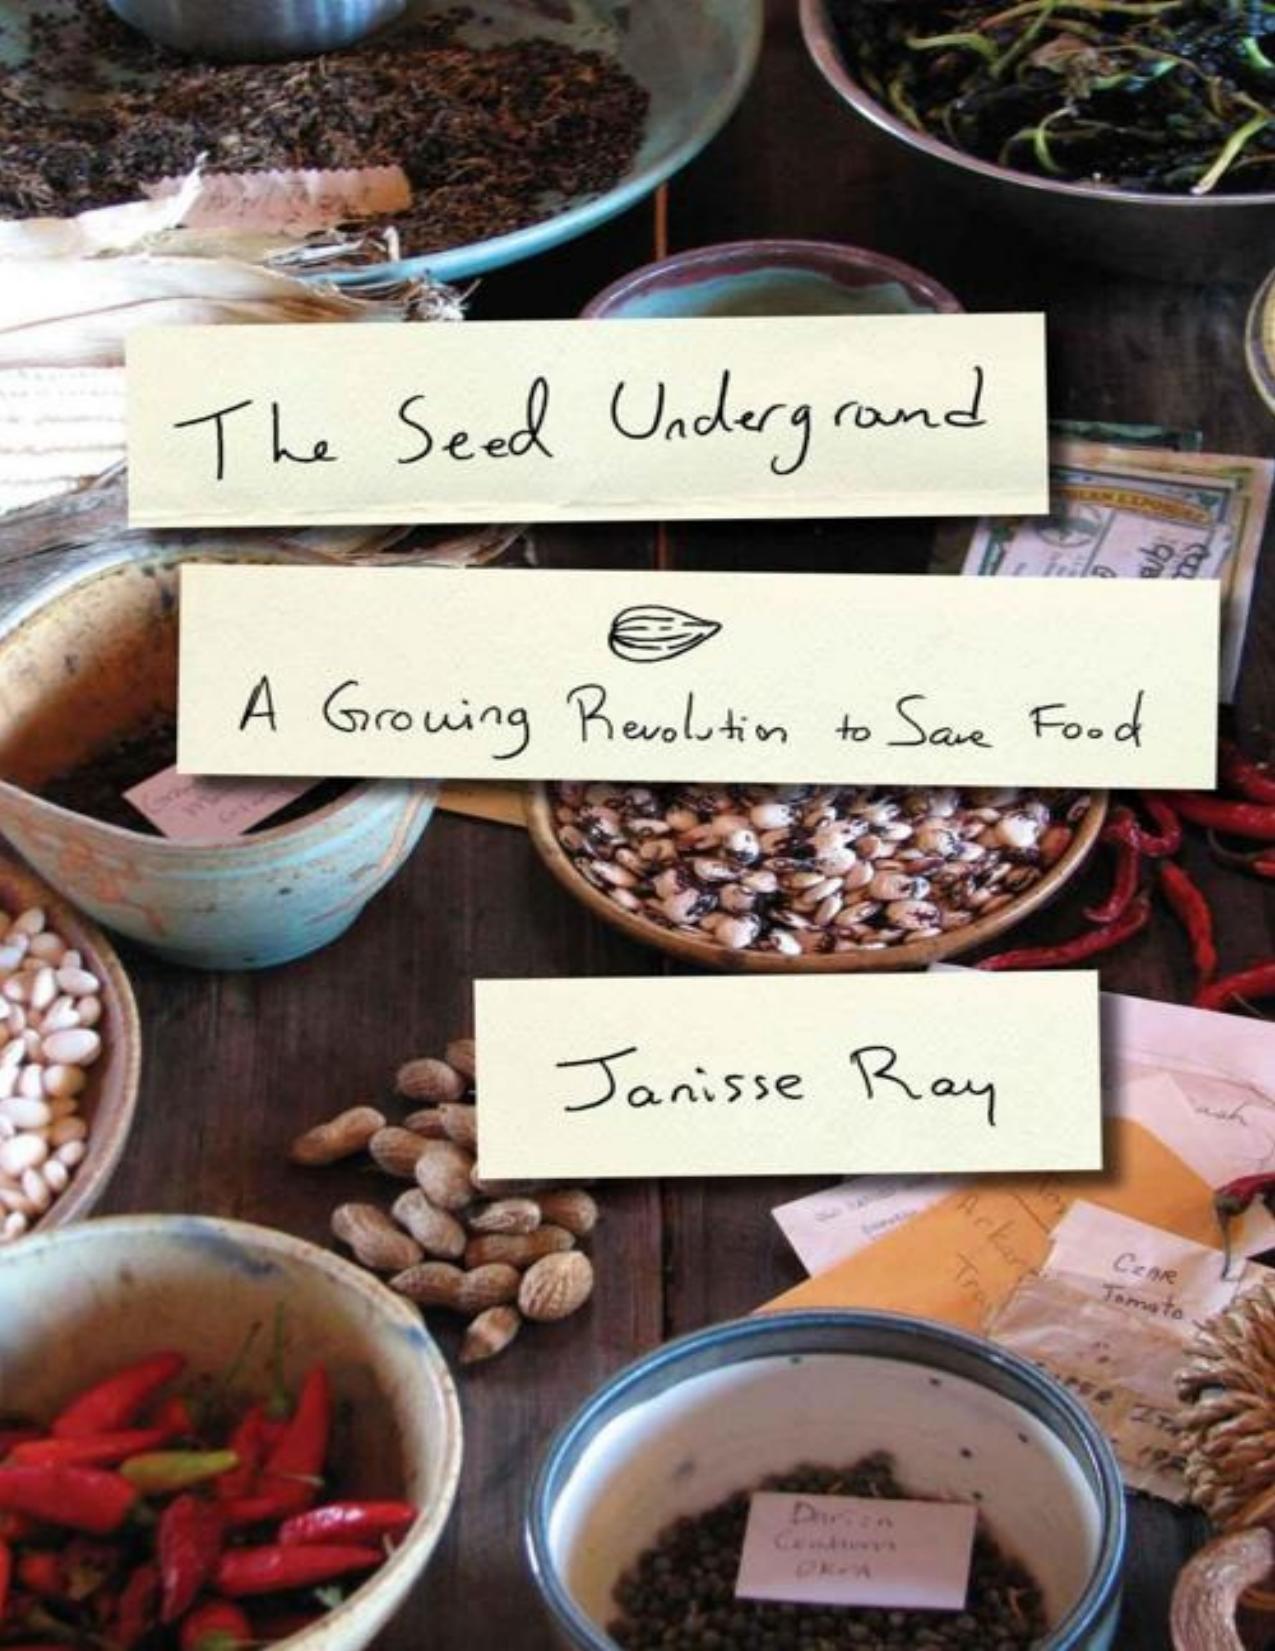 The Seed Underground: A Growing Revolution to Save Food by Ray Janisse